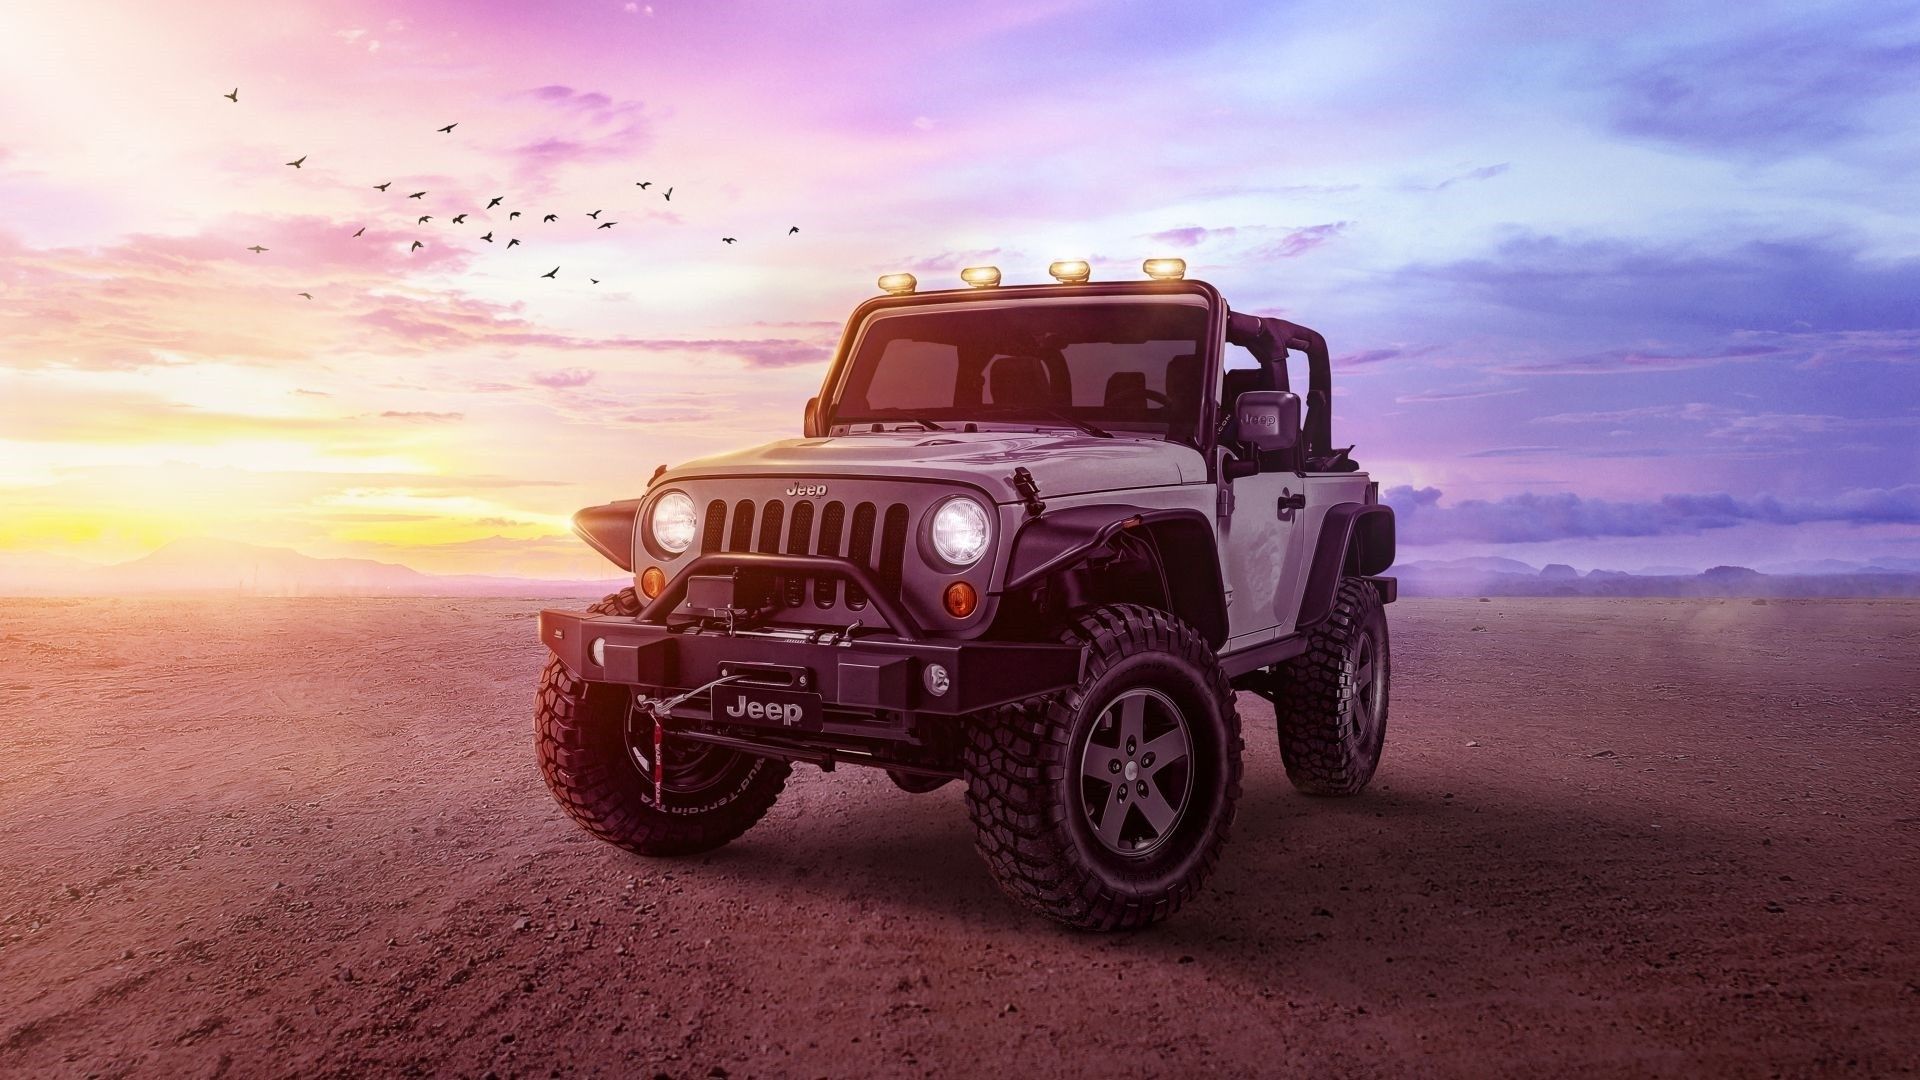 Jeep PC Backgrounds